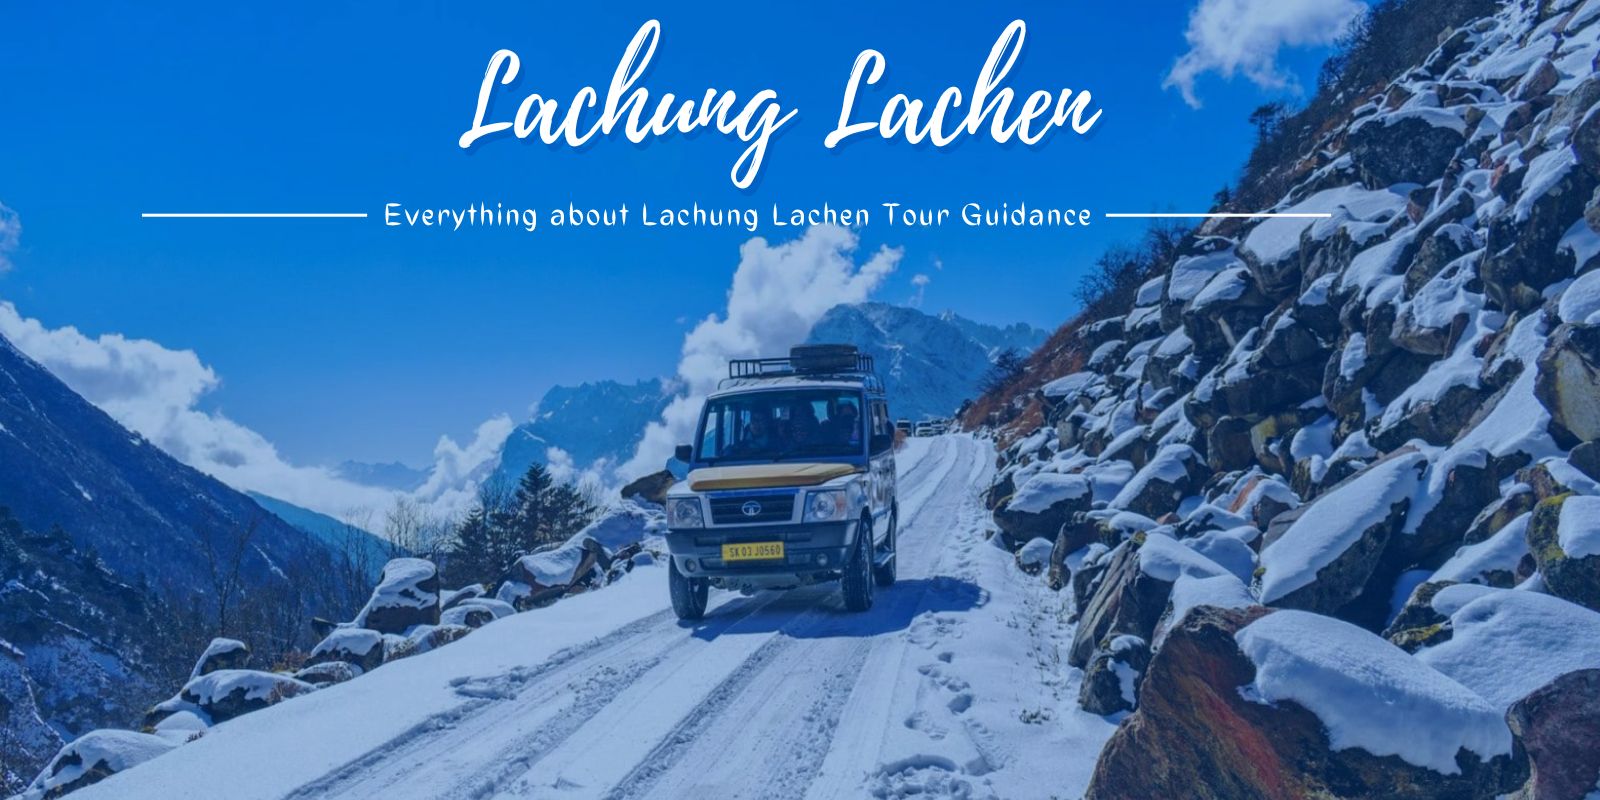 Everything about Lachung Lachen Tour Guidance